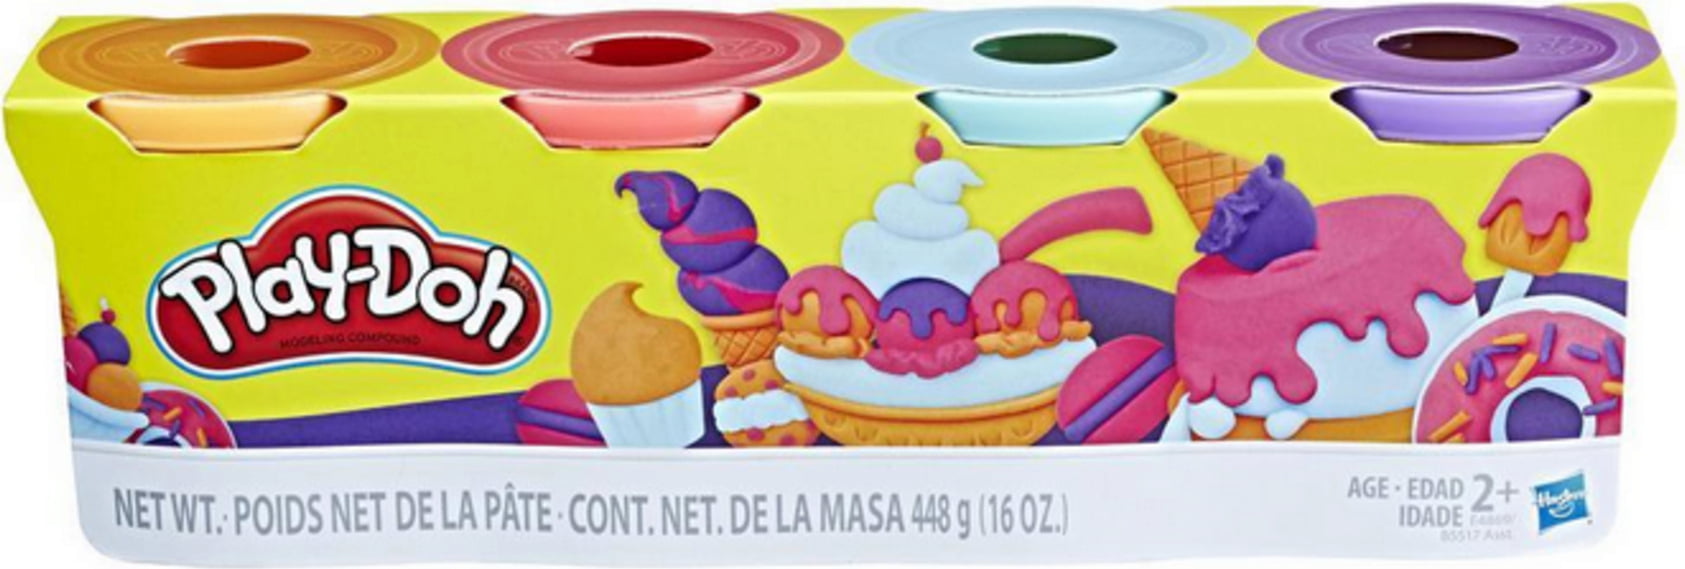 Play-doh 4pack Sweet